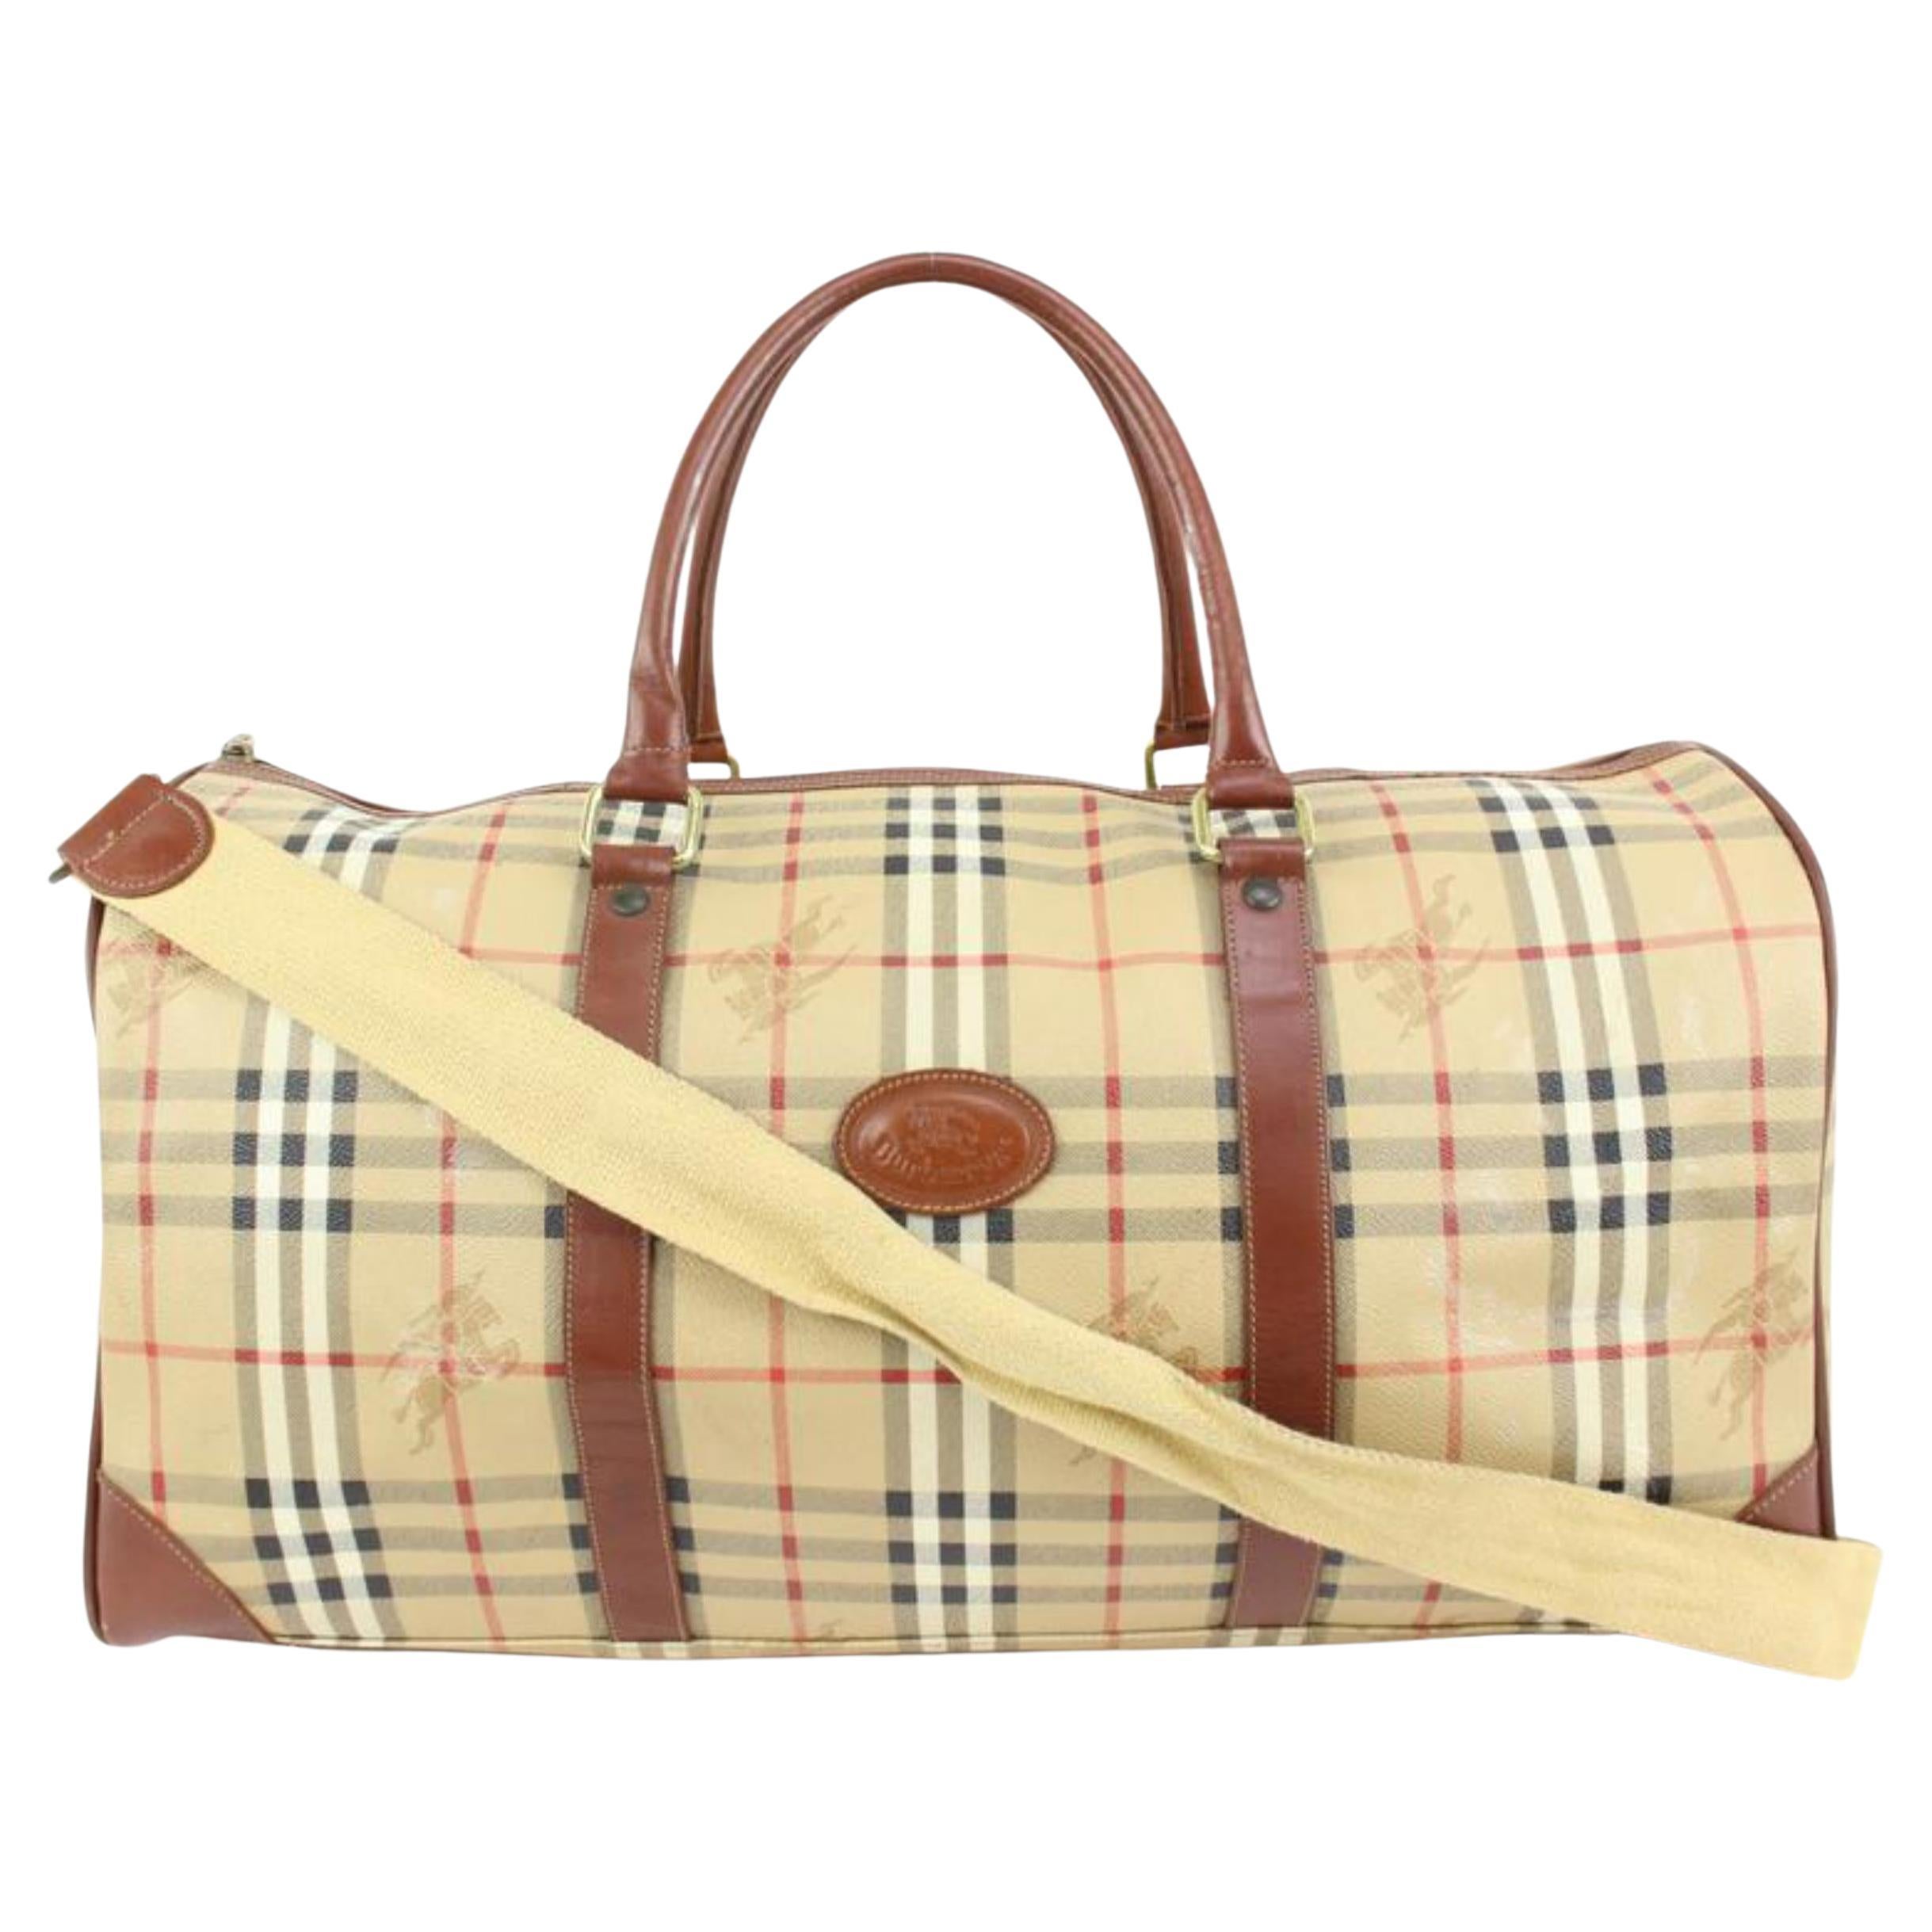 Burberry Beige Nova Check Duffle Bag with Strap Boston Upcycle ready 65b421s